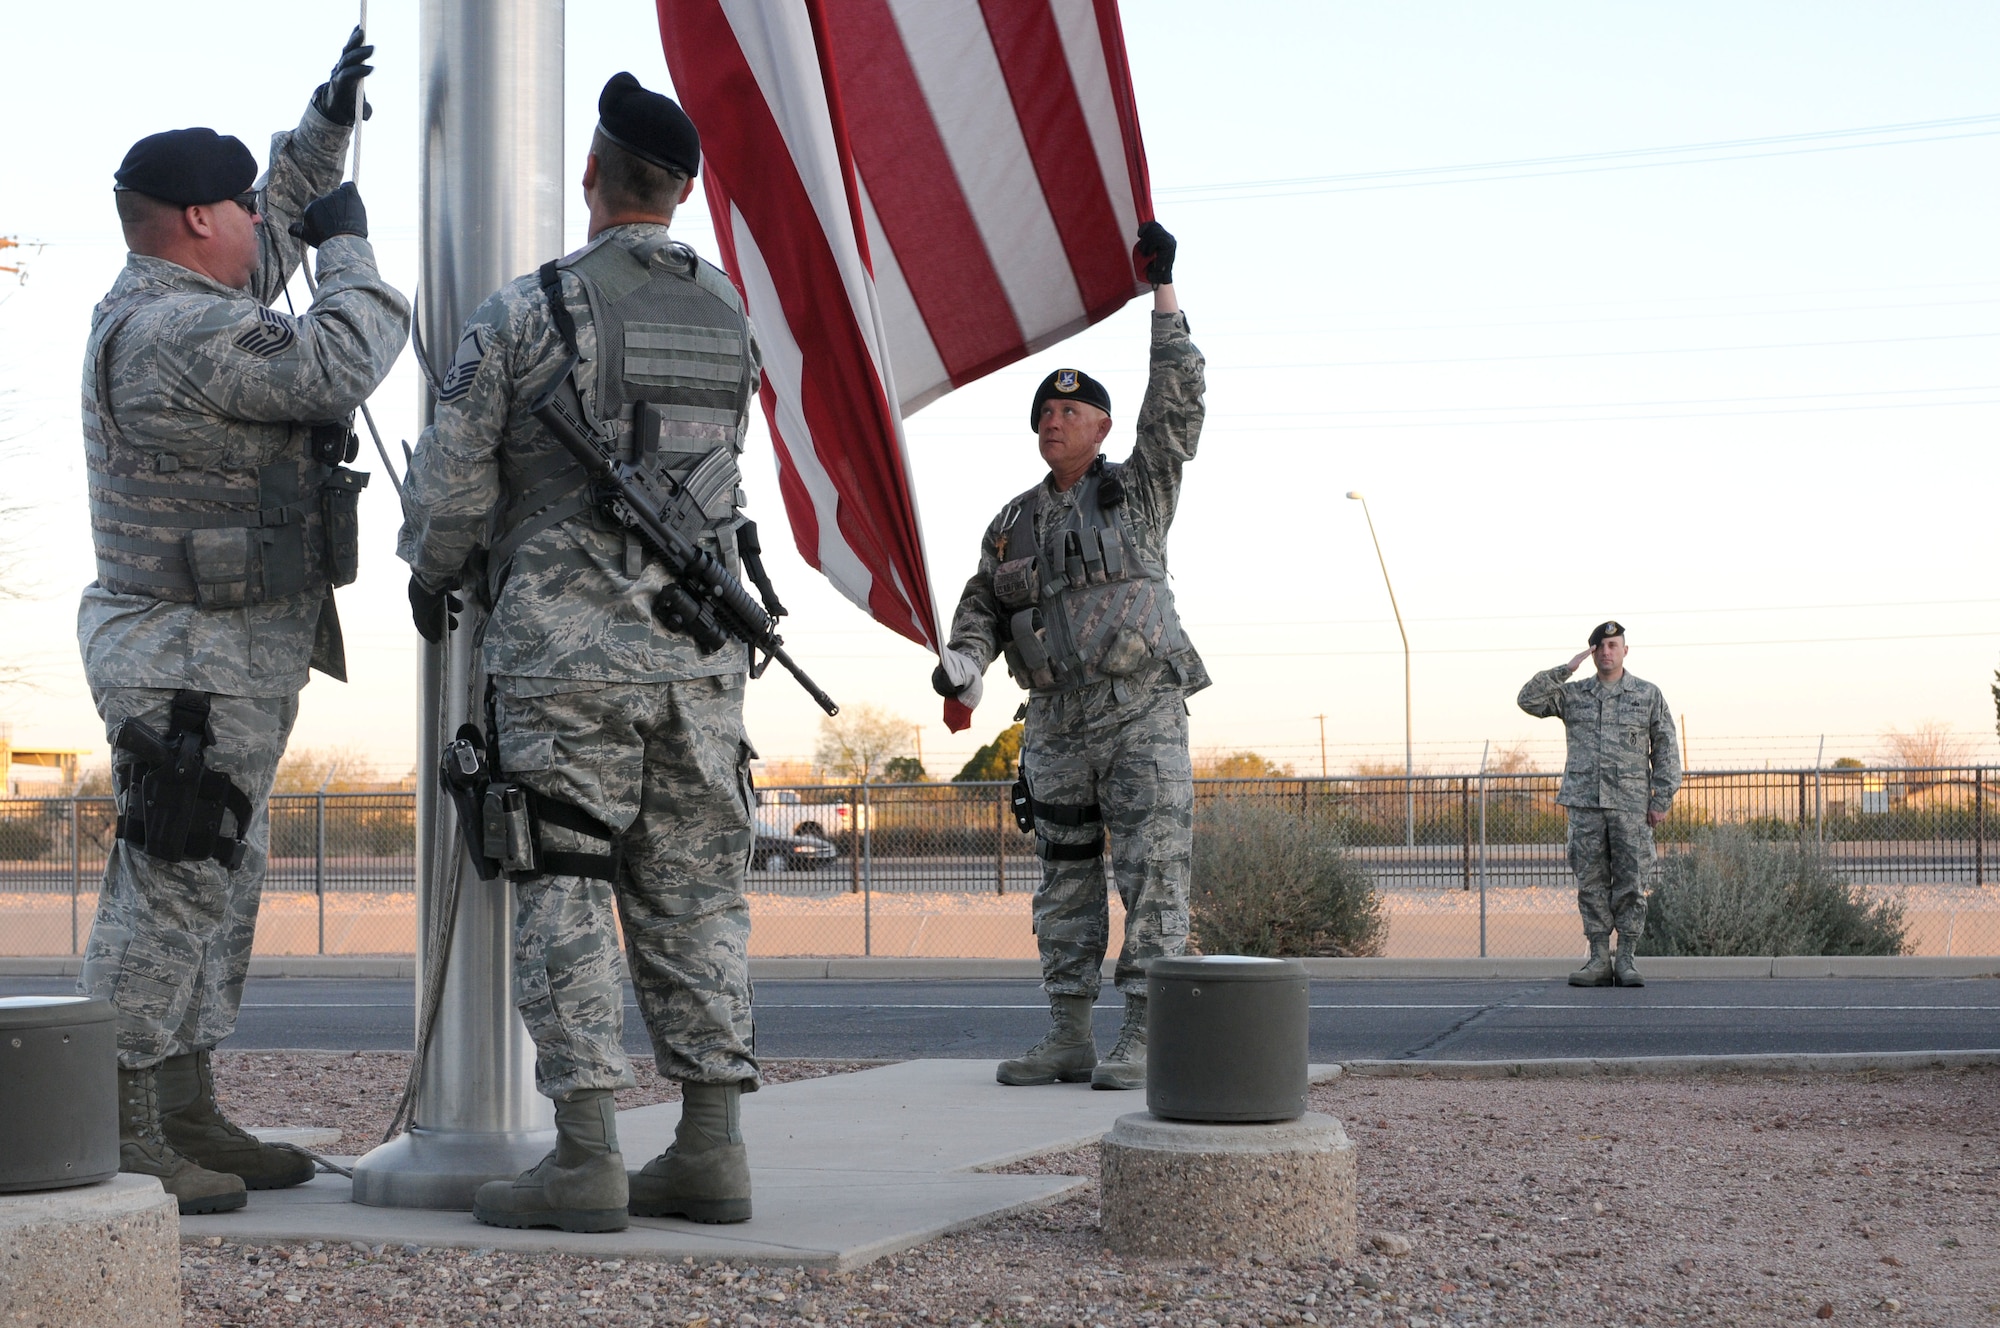 Tech. Sgt. Michael Royval, Master Sgt. Vince Muskiet and Master Sgt. Jeff Thornsberry raise the U.S. flag Feb. 27 at the 162nd Fighter Wing at Tucson International Airport while Master Sgt. James Mulcahey salutes. Even if the National Anthem isn’t played, Airmen on base are reminded to stop and salute if they see this ceremony occurring on base and drivers are reminded to pull over and stop until it’s completed. (U.S. Air Force photo/Maj. Gabe Johnson)